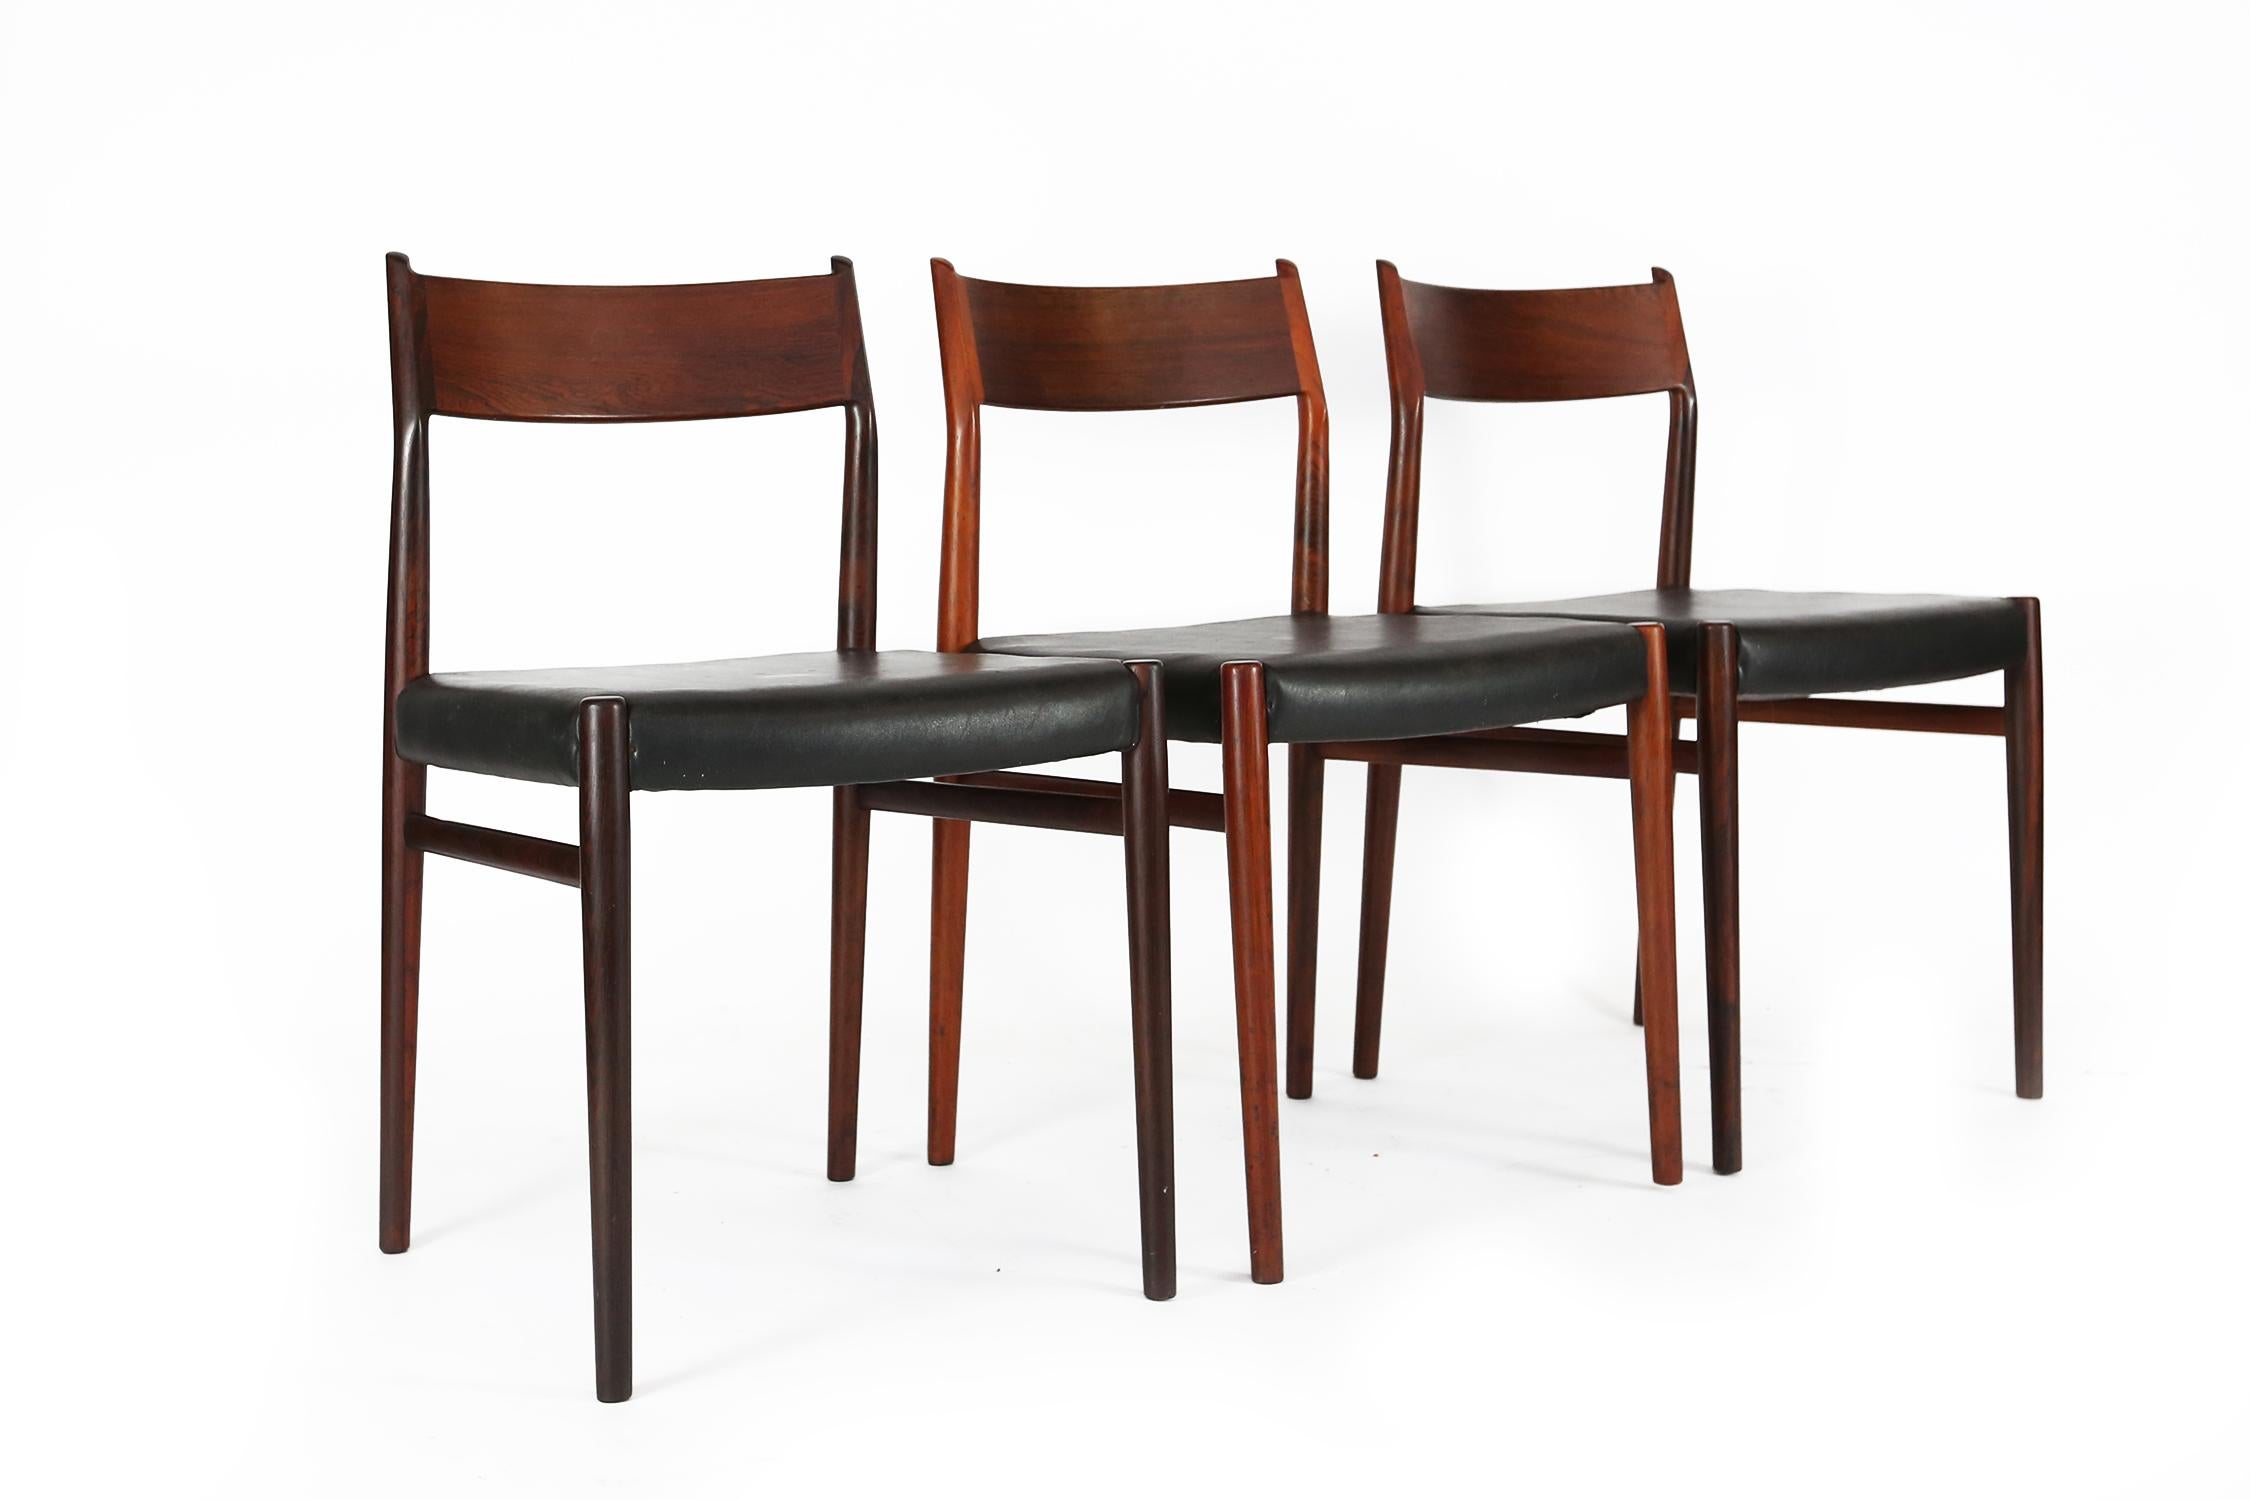 Very nice set of 8 dining chairs model 418 designed by Arne Vodder for Sibast Mobler, Denmark 1965, 6 chairs and 2 armchairs or carvers. 
These chairs are made of solid rosewood and original upholstery in very good condition. The chairs are very